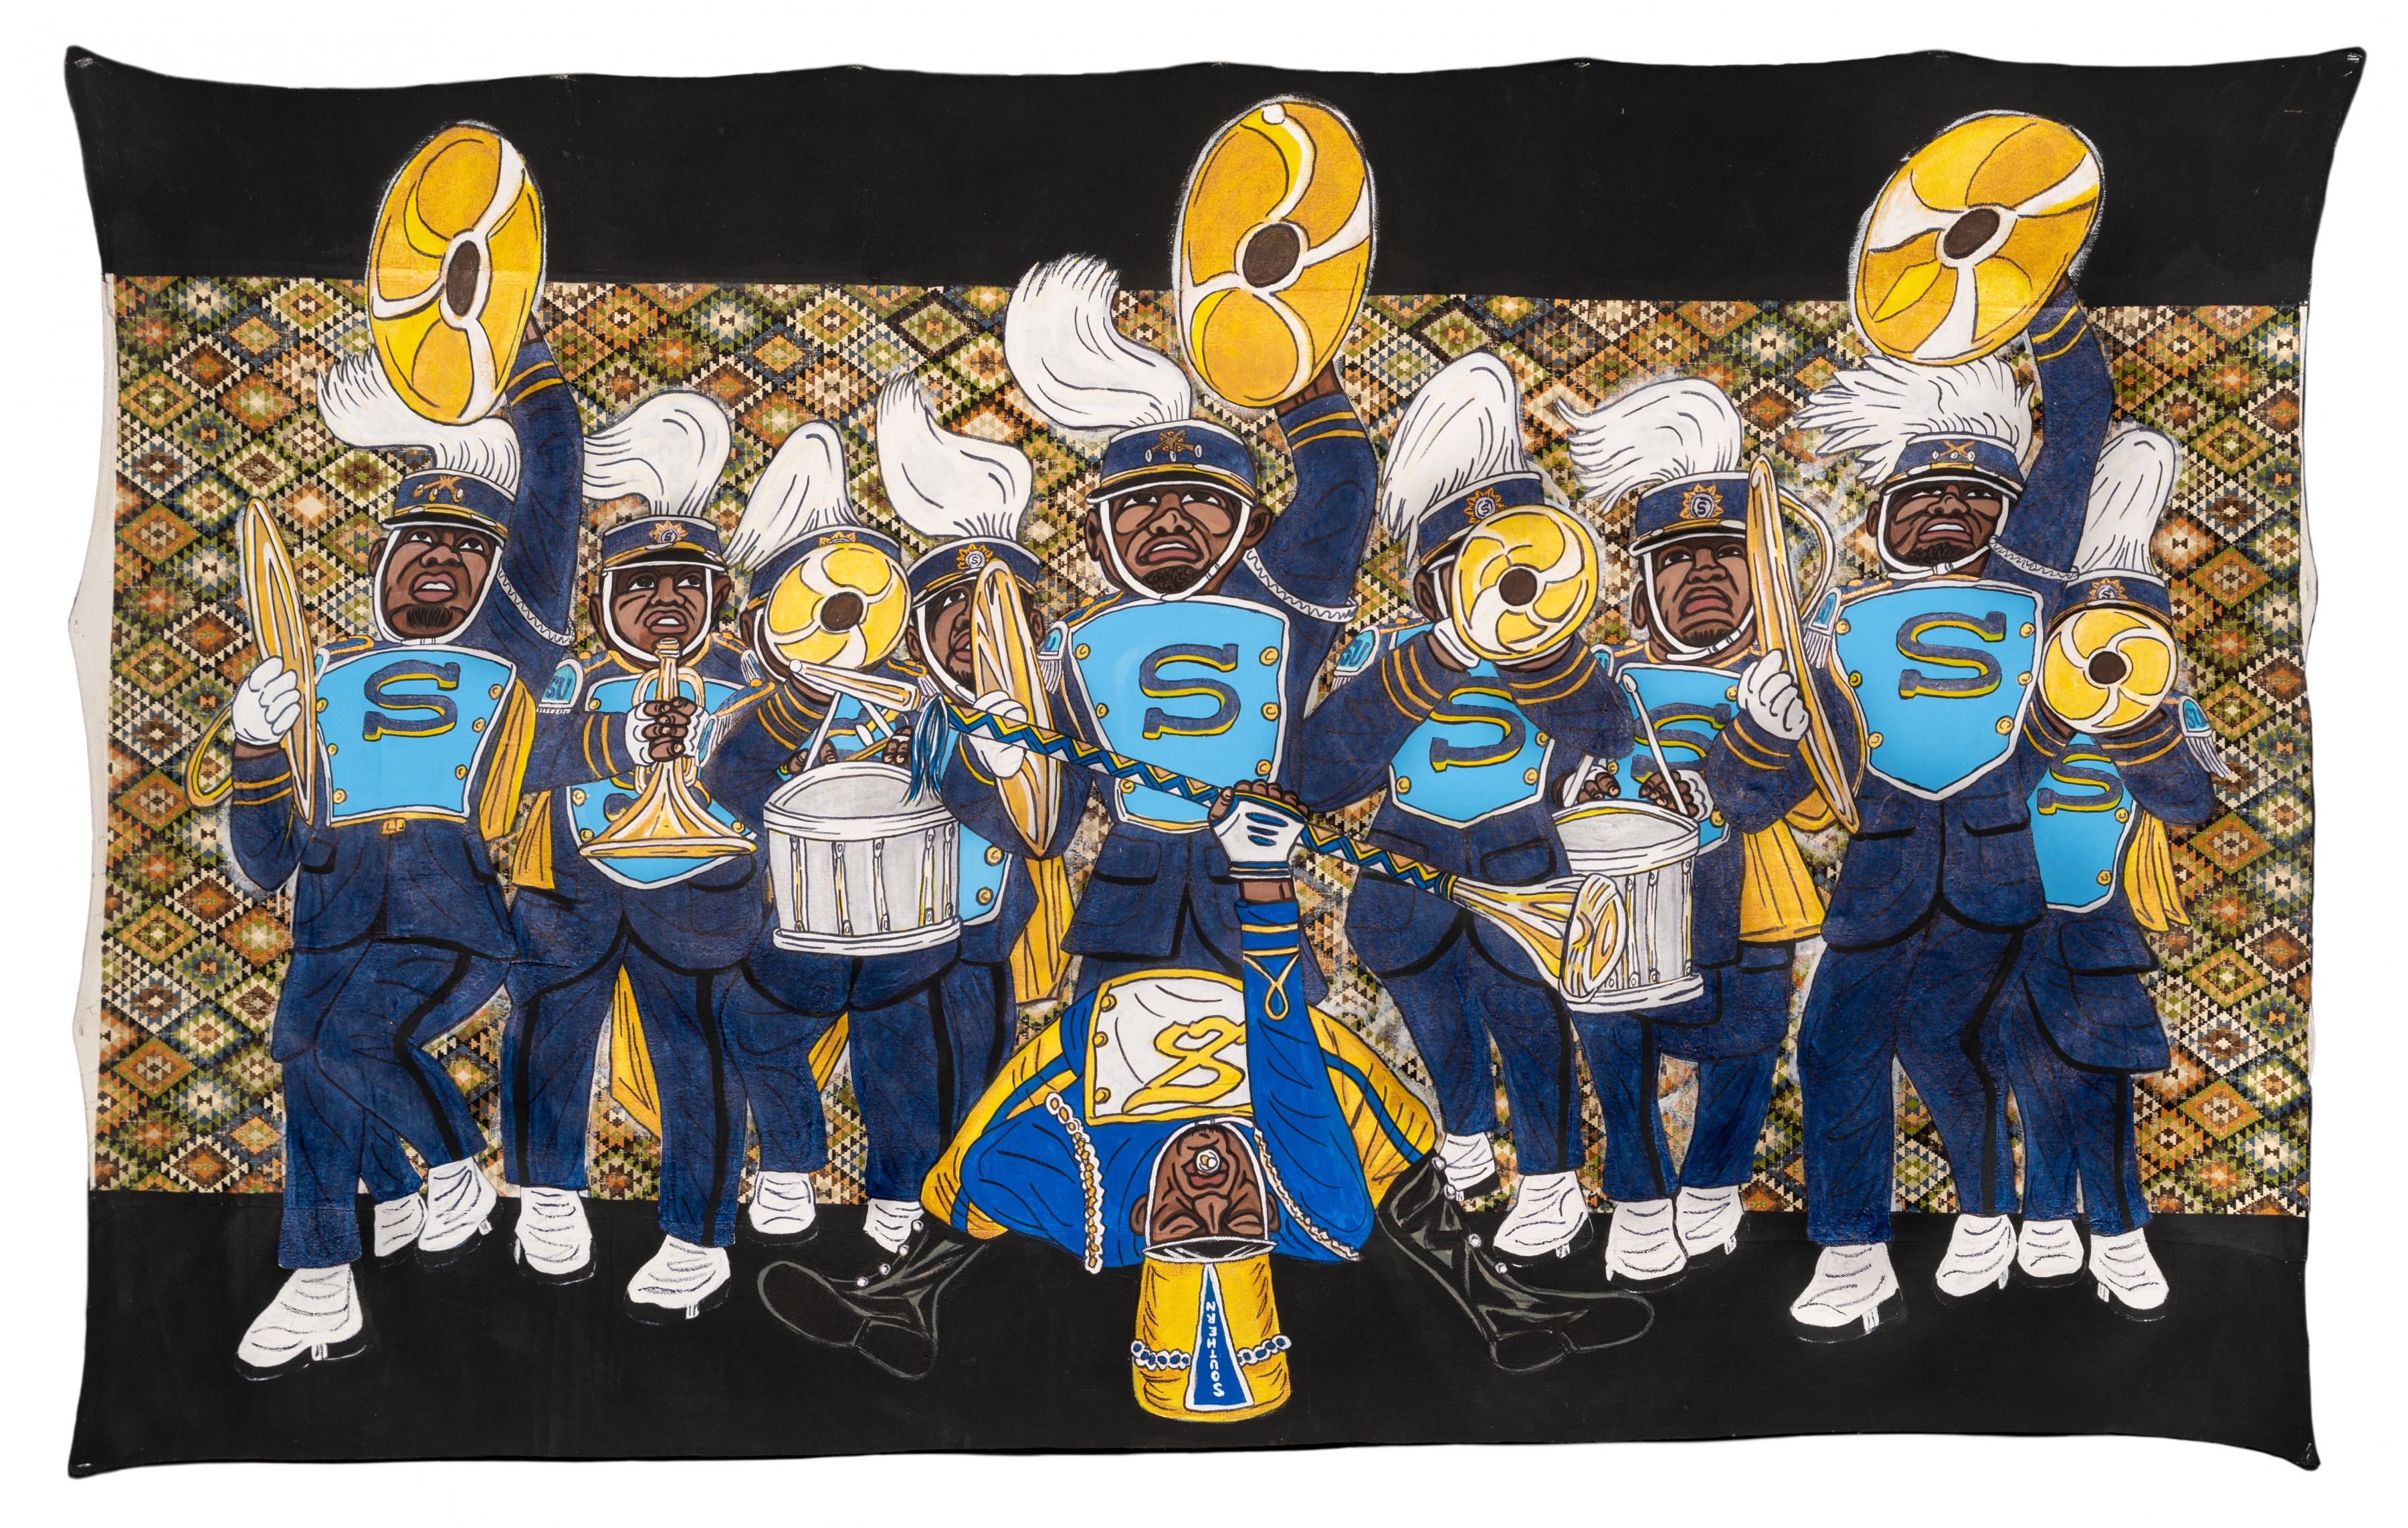 Keith Duncan, Southern University Marching Band, 2020
68 x 108 inches